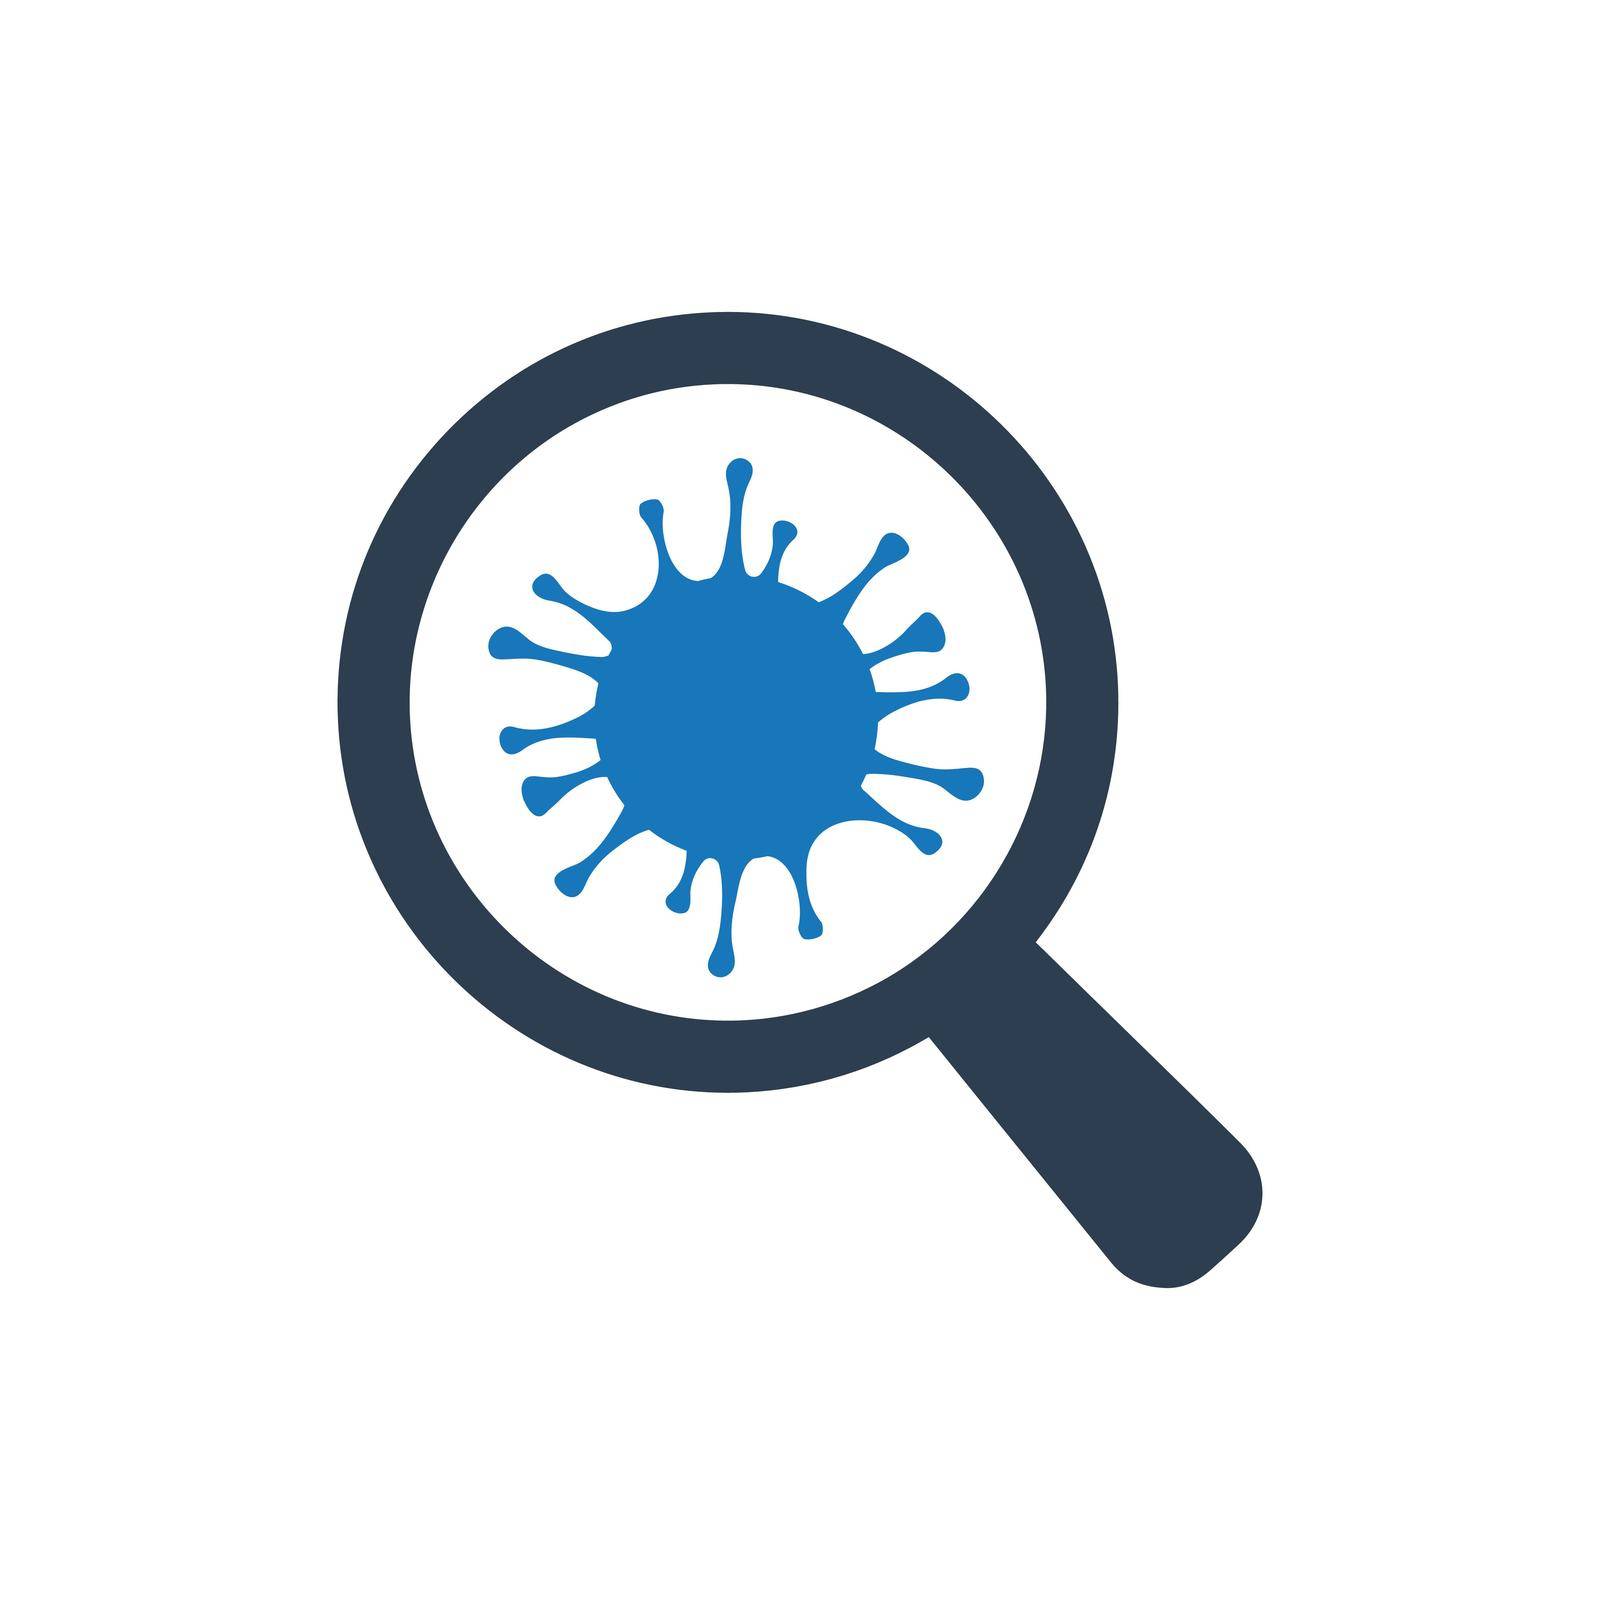 Find Bacteria icon. Vector EPS file.